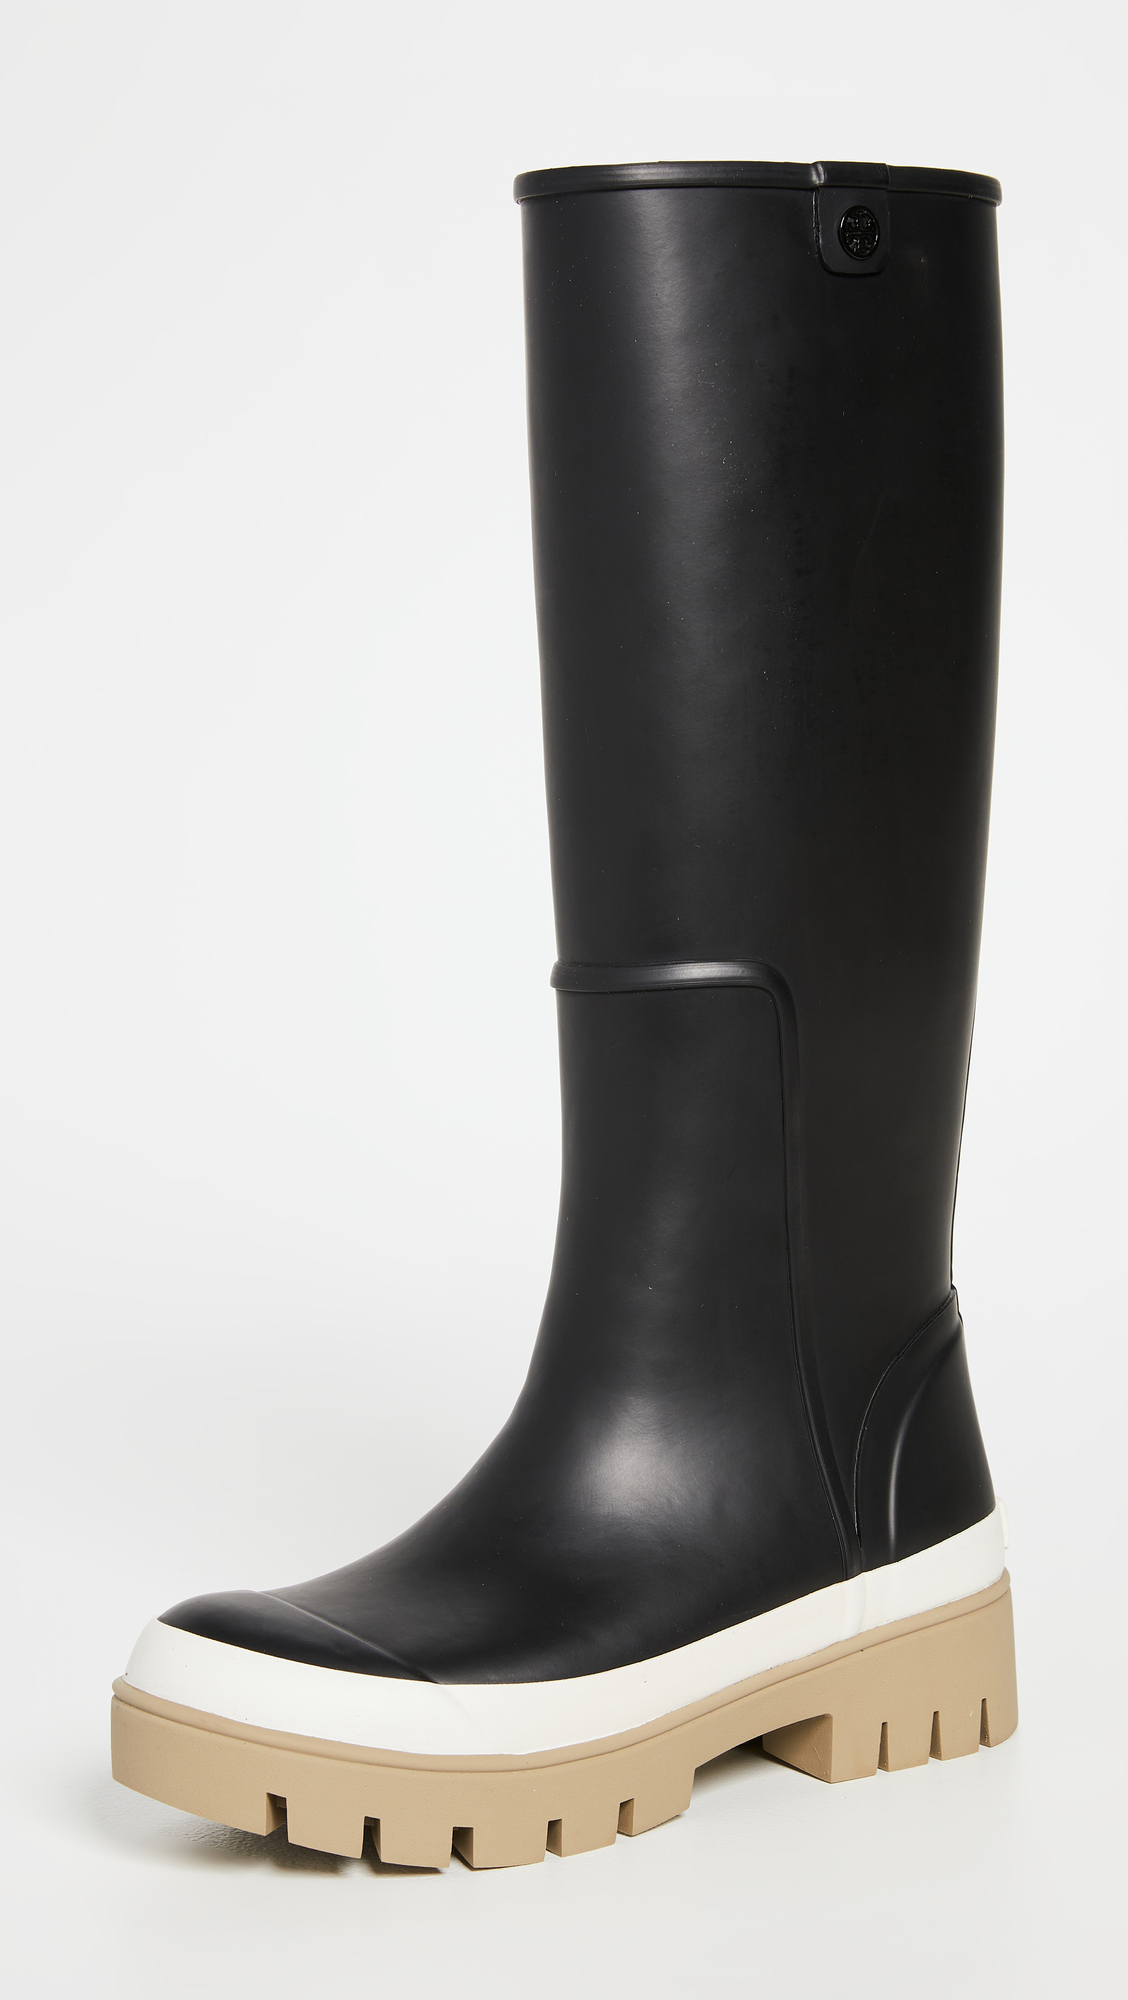 Tory Burch Foul Weather Tall Boots